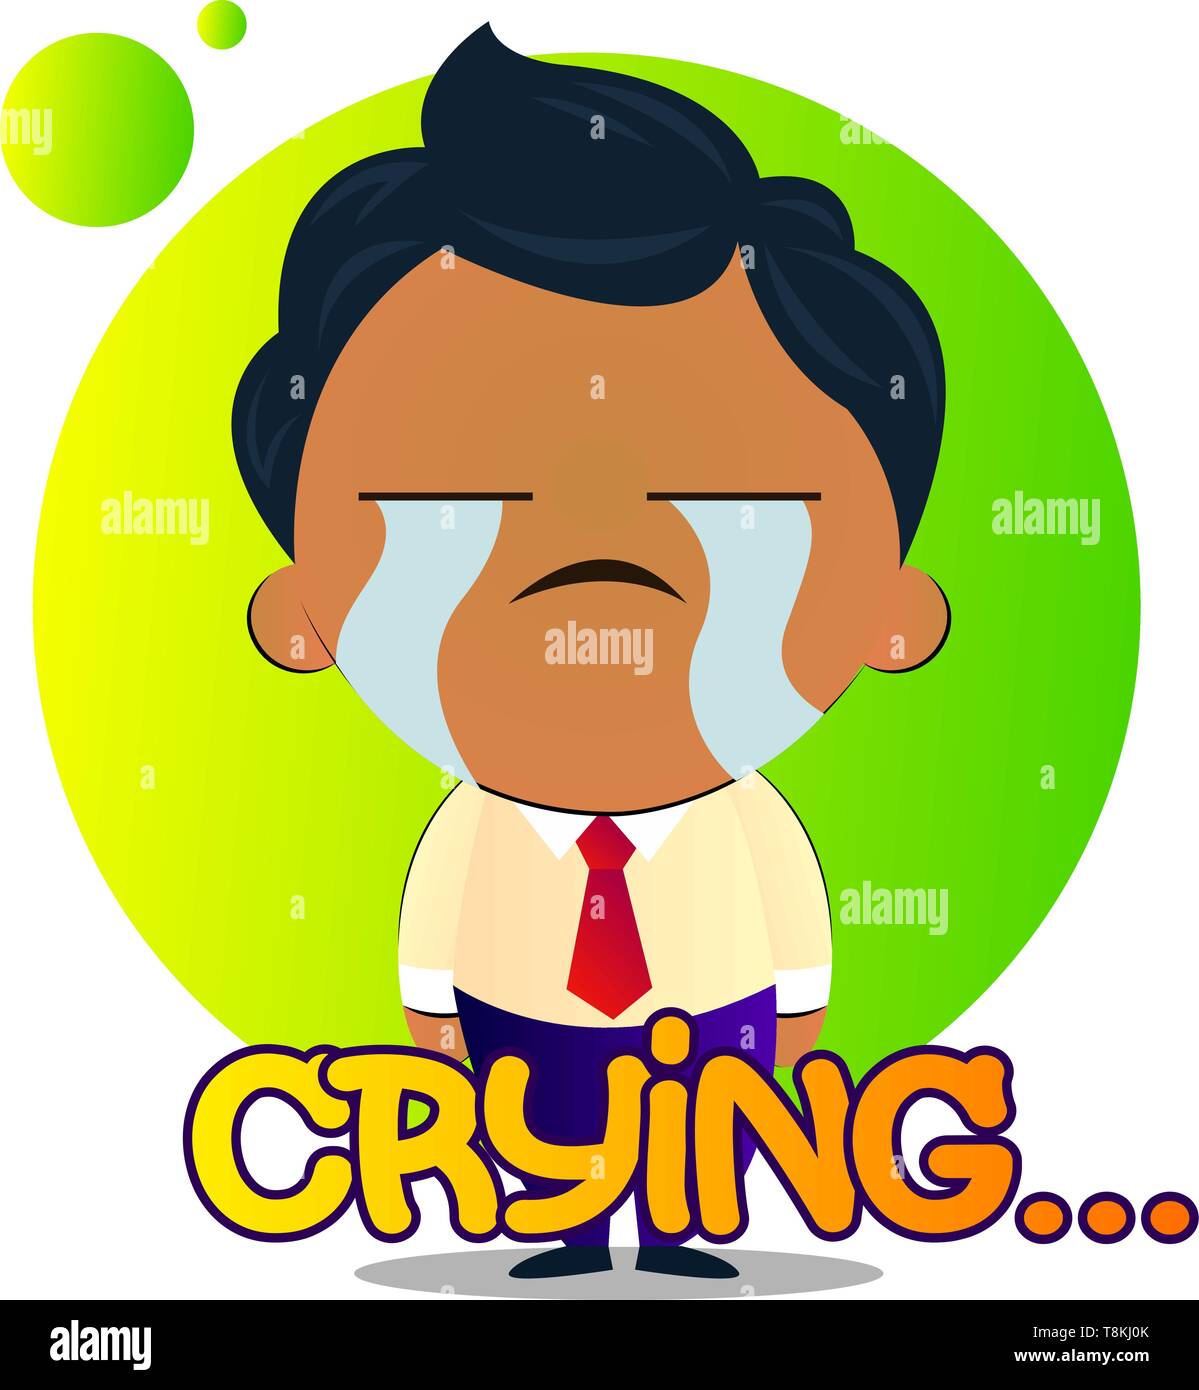 Boy with black curly hair is crying, illustration, vector on white background. Stock Vector